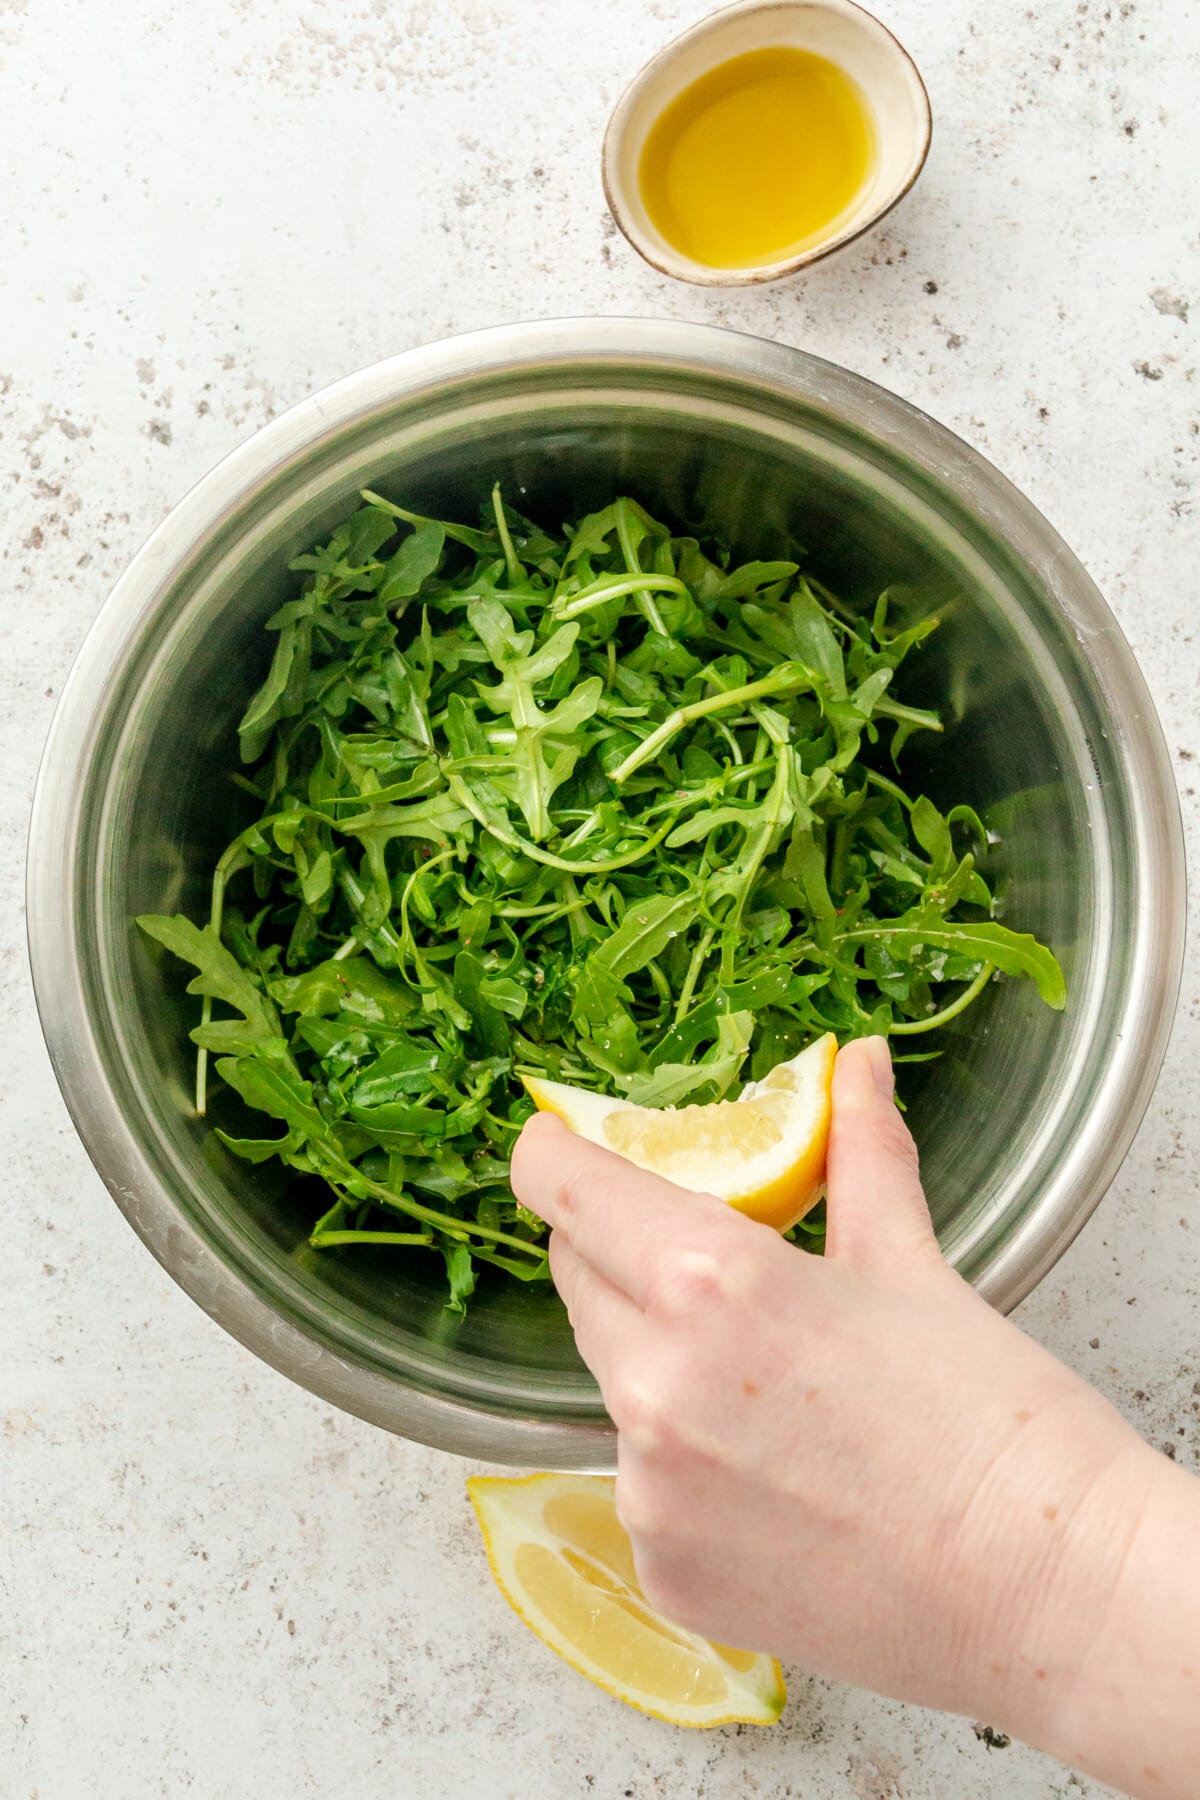 A lemon wedge is squeezed over an arugula salad in a stainless steel bowl on a light grey surface.